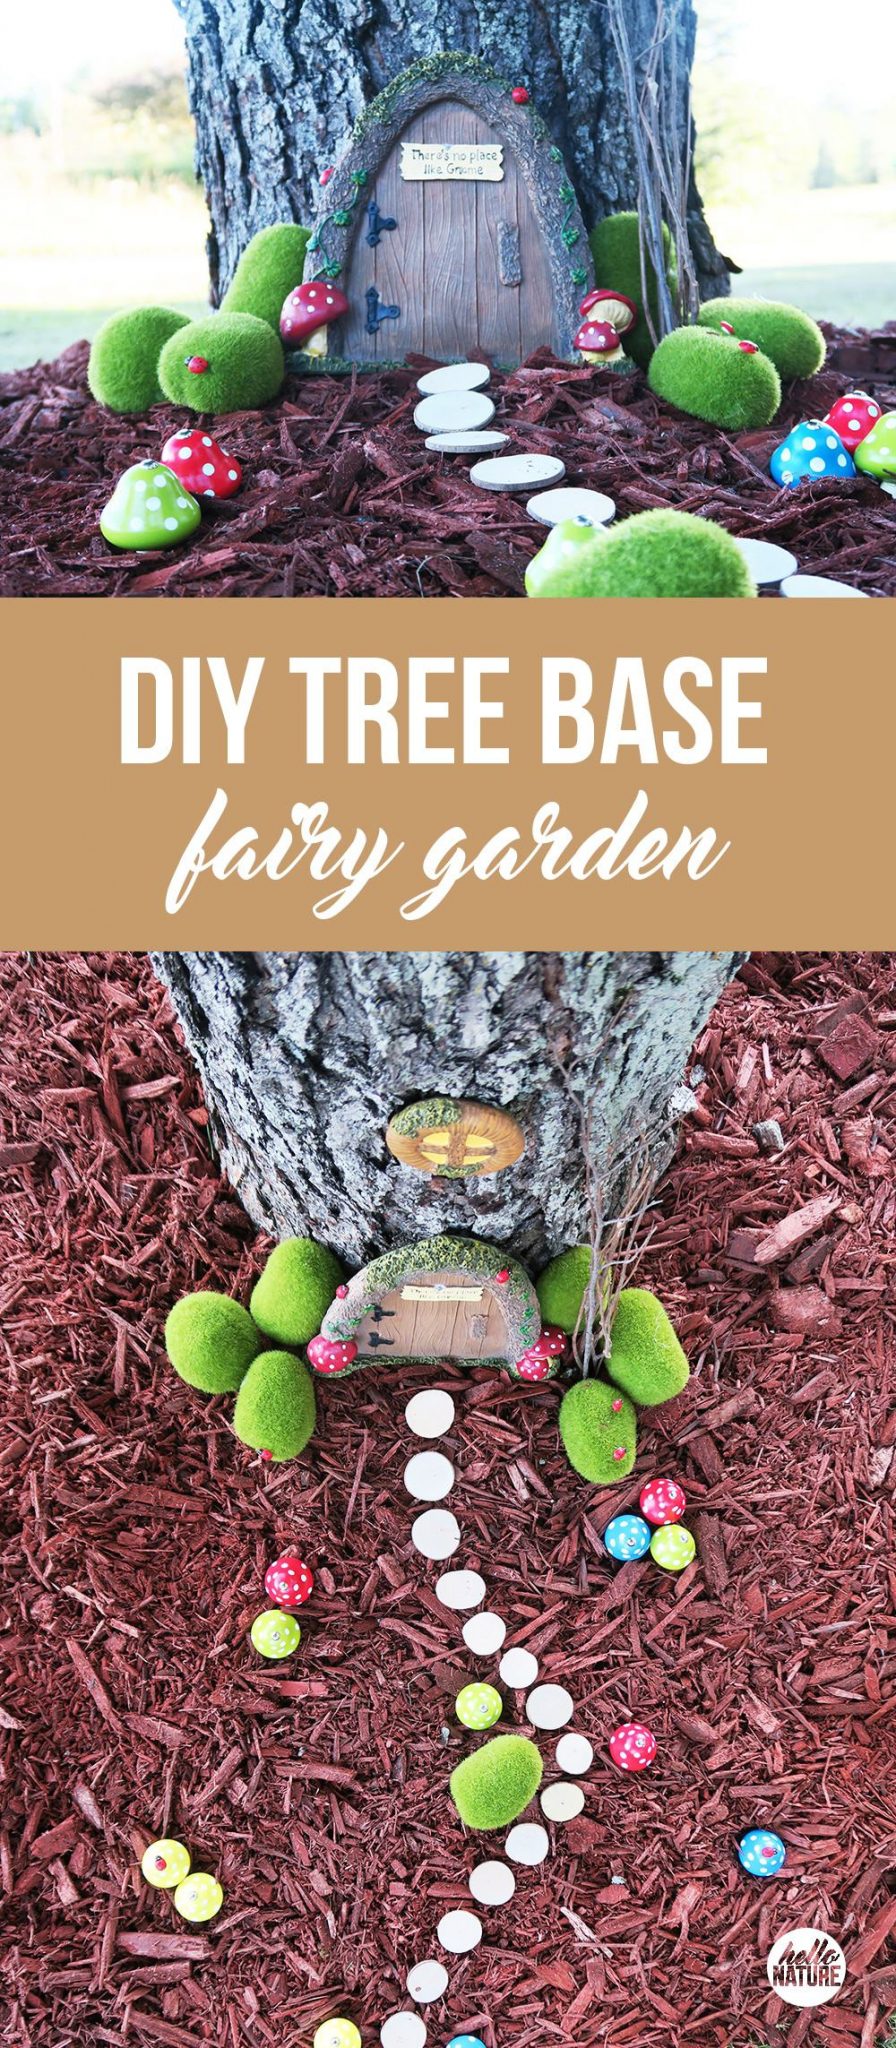 Want to add some whimsy to your yard? This simple DIY fairy garden is the answer! You'll turn your tree base into a magical scene in no time.